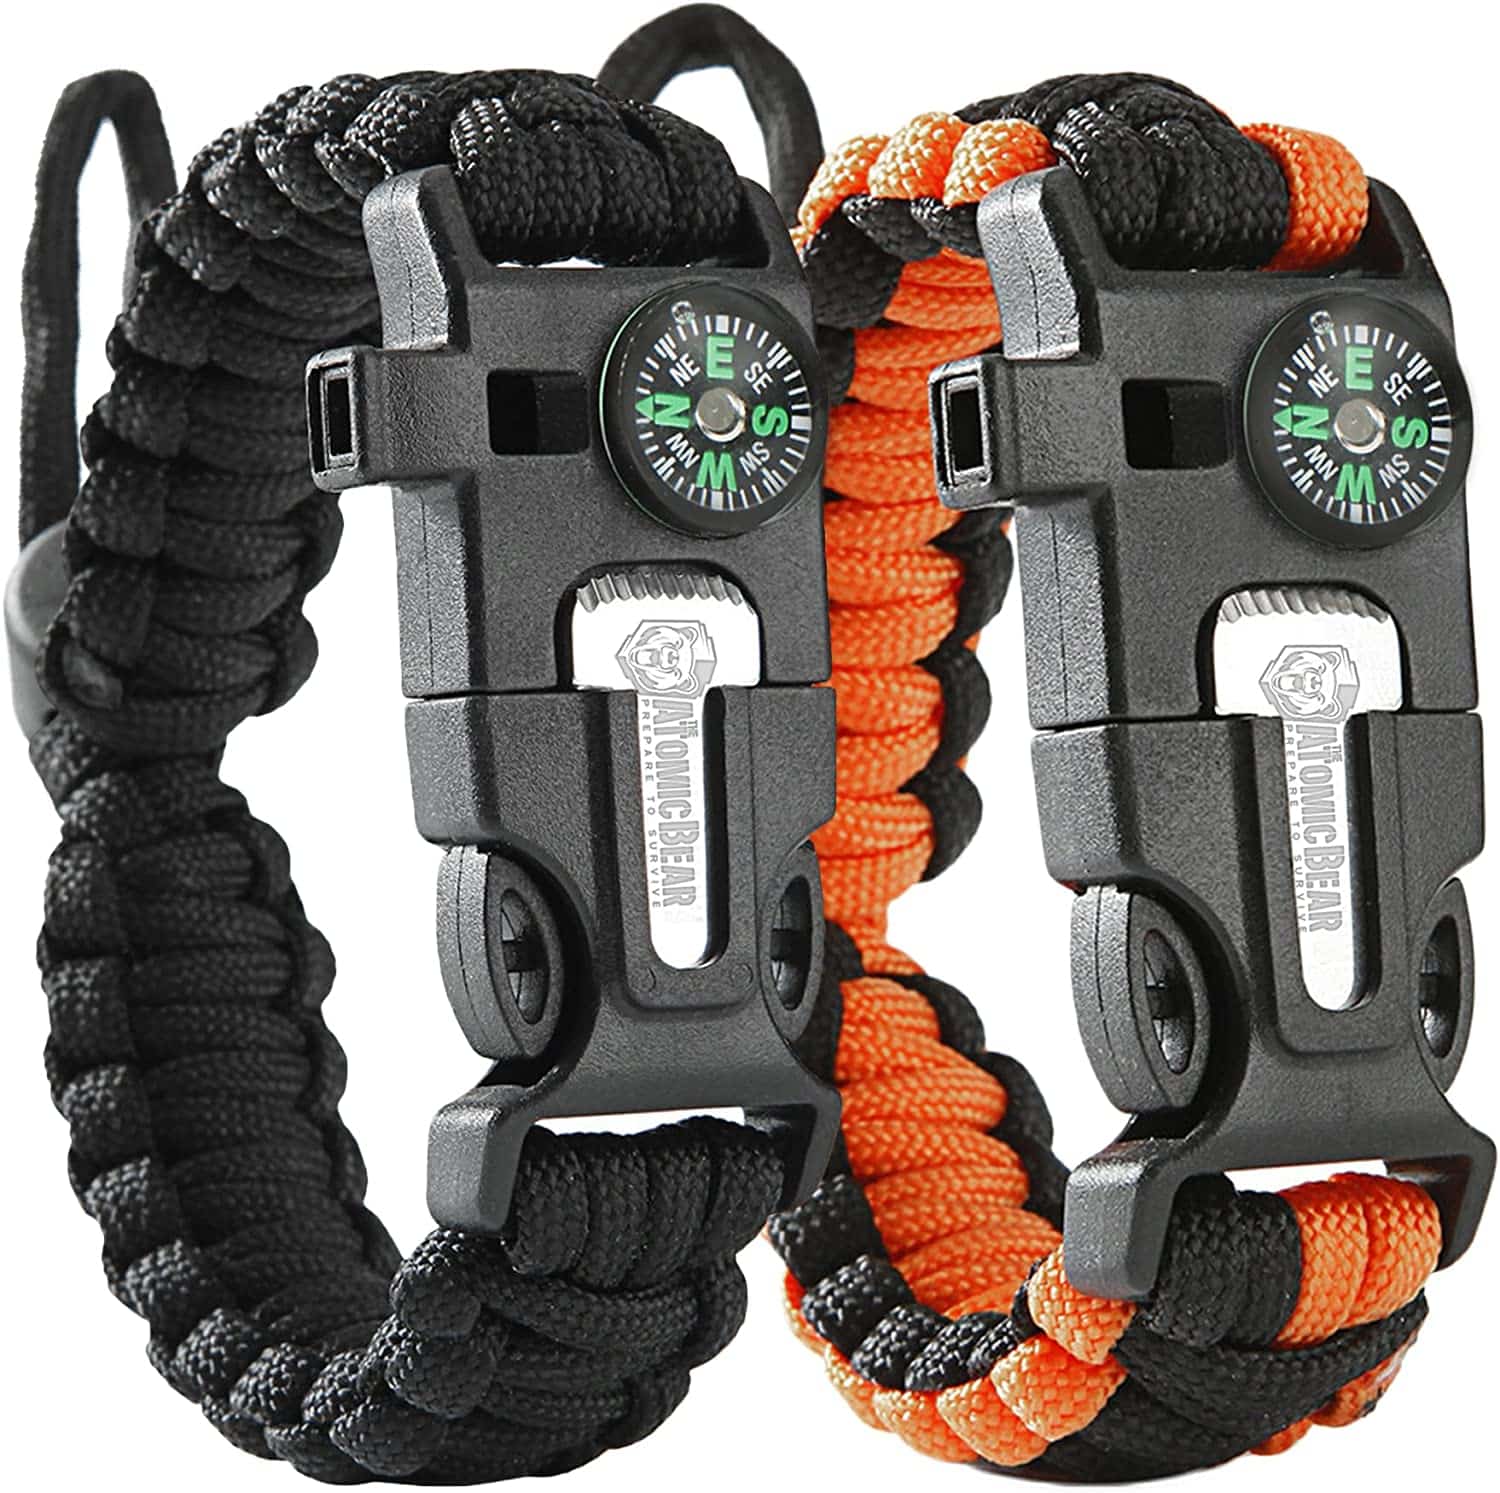 Multipurpose Paracord Bracelet for the Outdoorsy